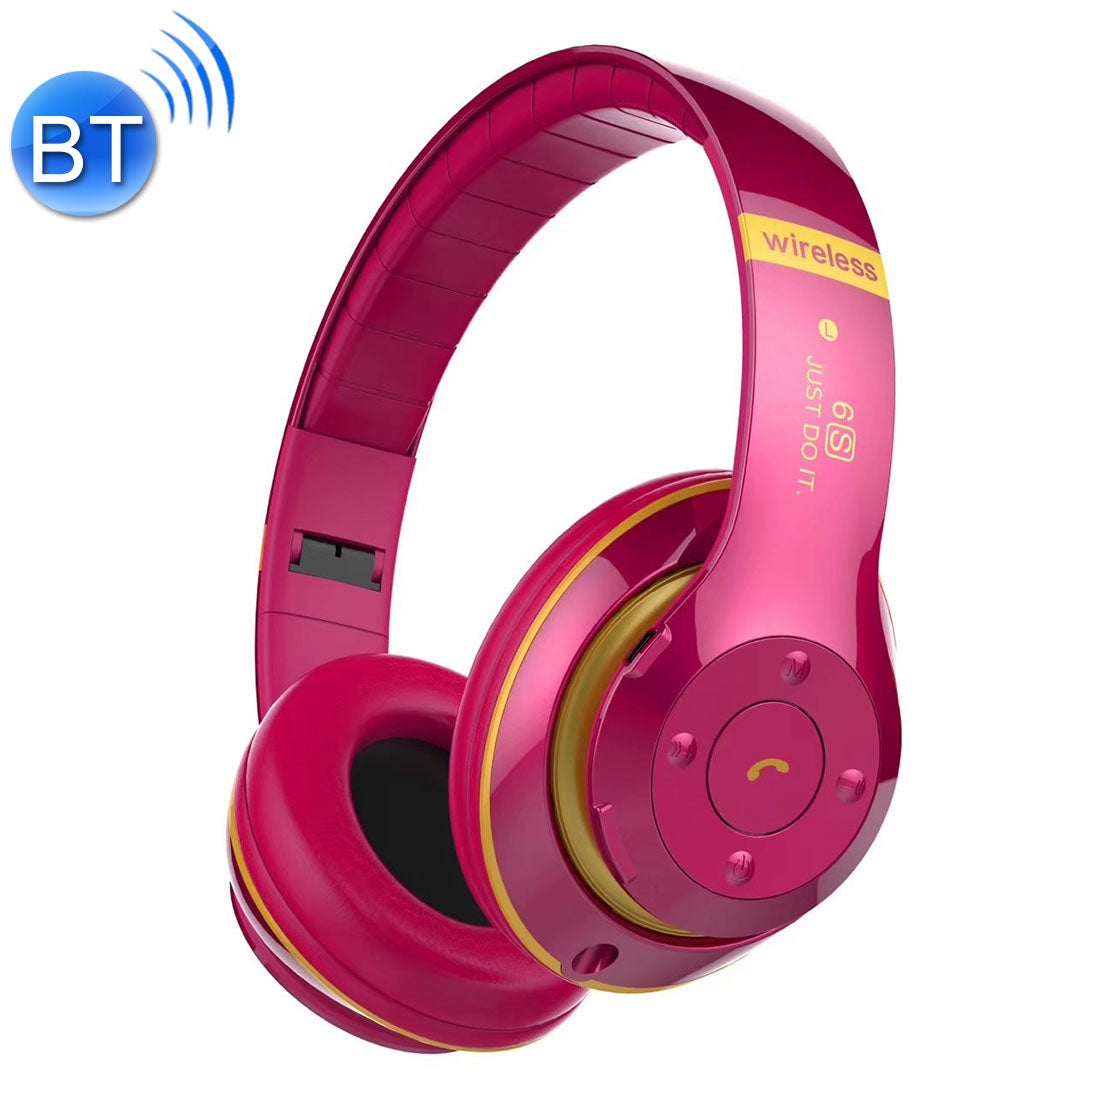 V30 Wireless Bluetooth 4.2 Headphone with Mic & FM & TF Card & Handfree Function, For iPhone, iPad, iPod, Samsung, HTC, Sony, Huawei, Xiaomi and other Audio Devices(Magenta)